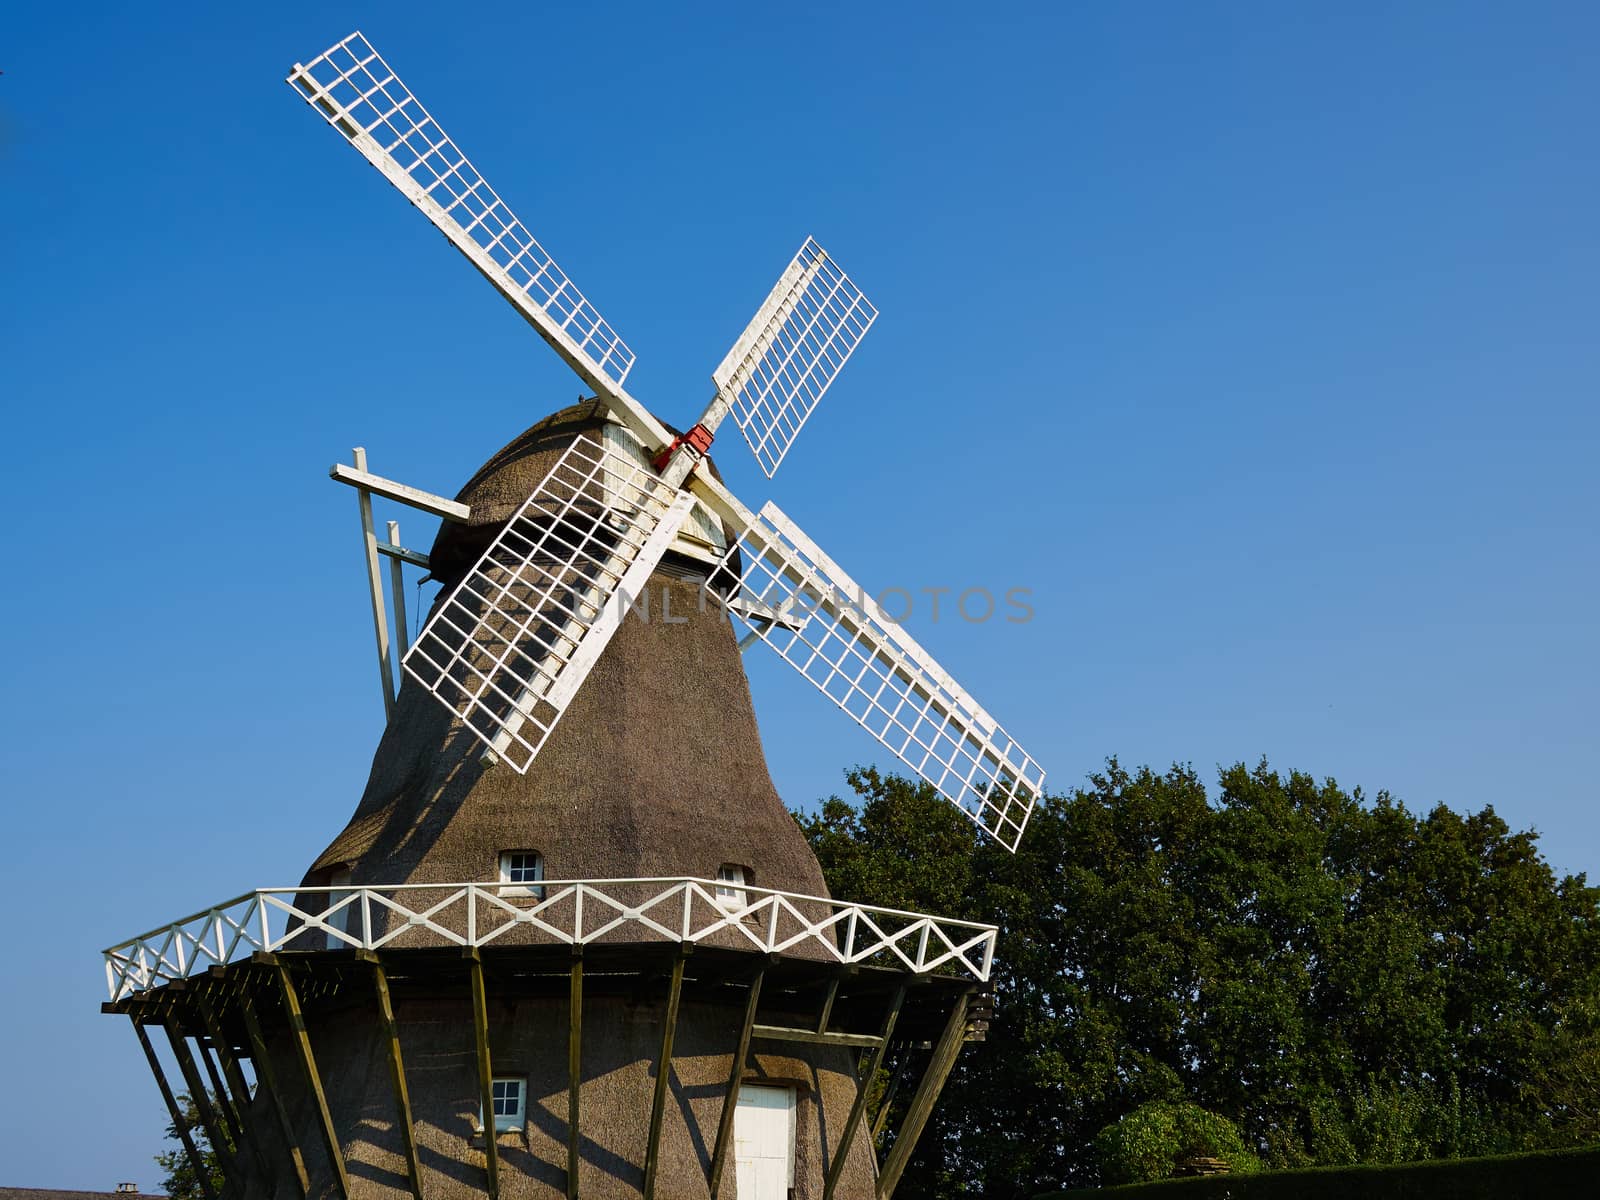 Traditional old Danish windmill in the countryside Funen Denmark